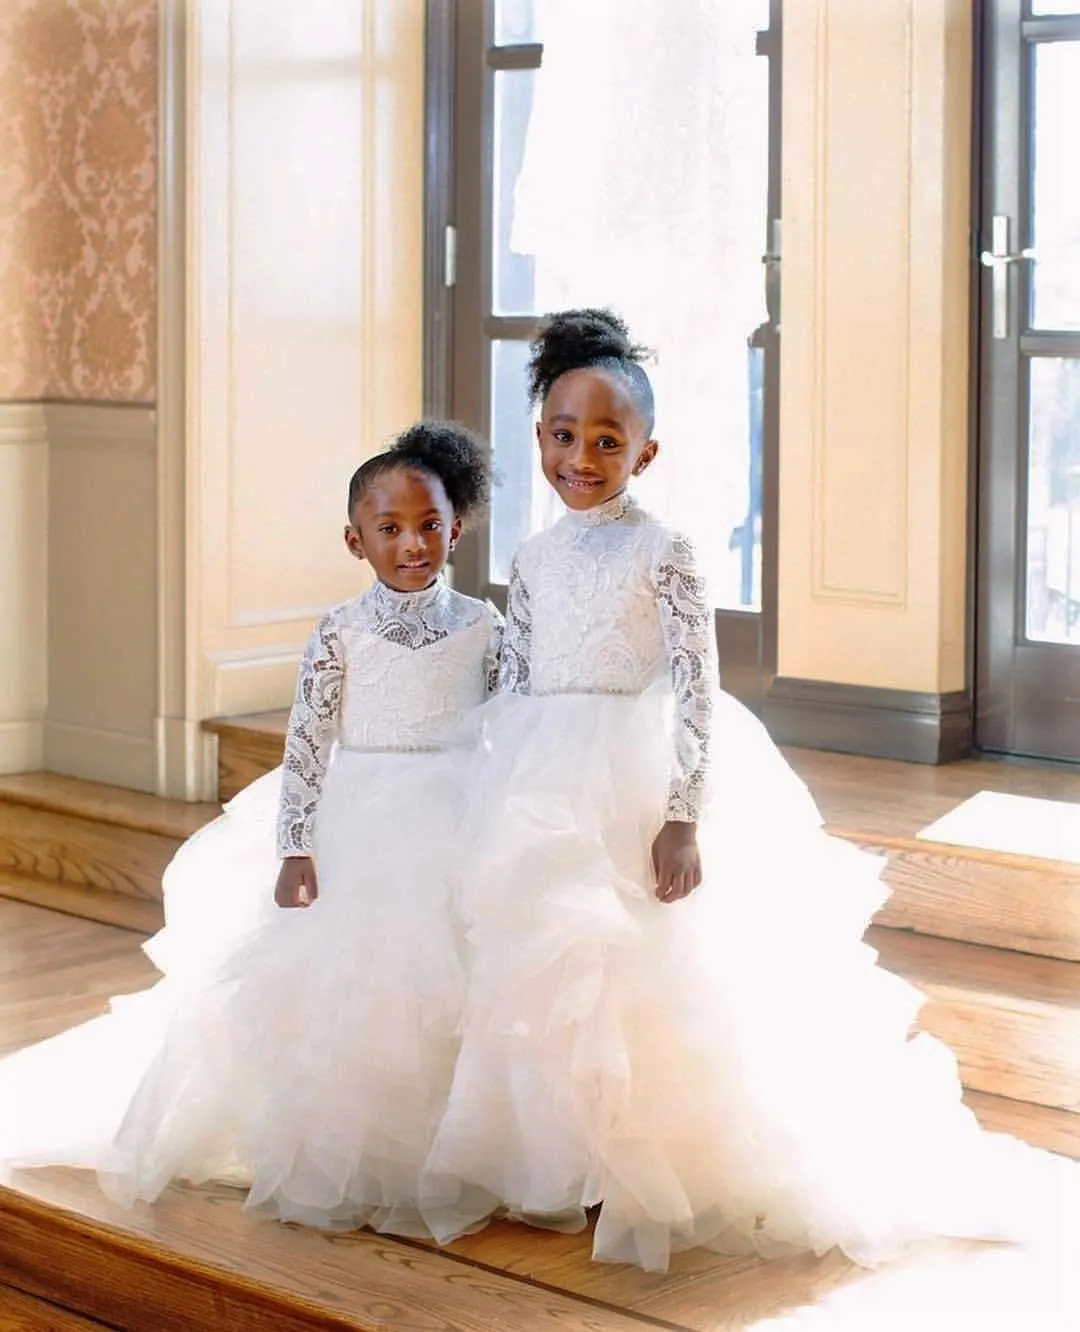 How to Pick Flower Girl Dresses: 9 Rules to Follow